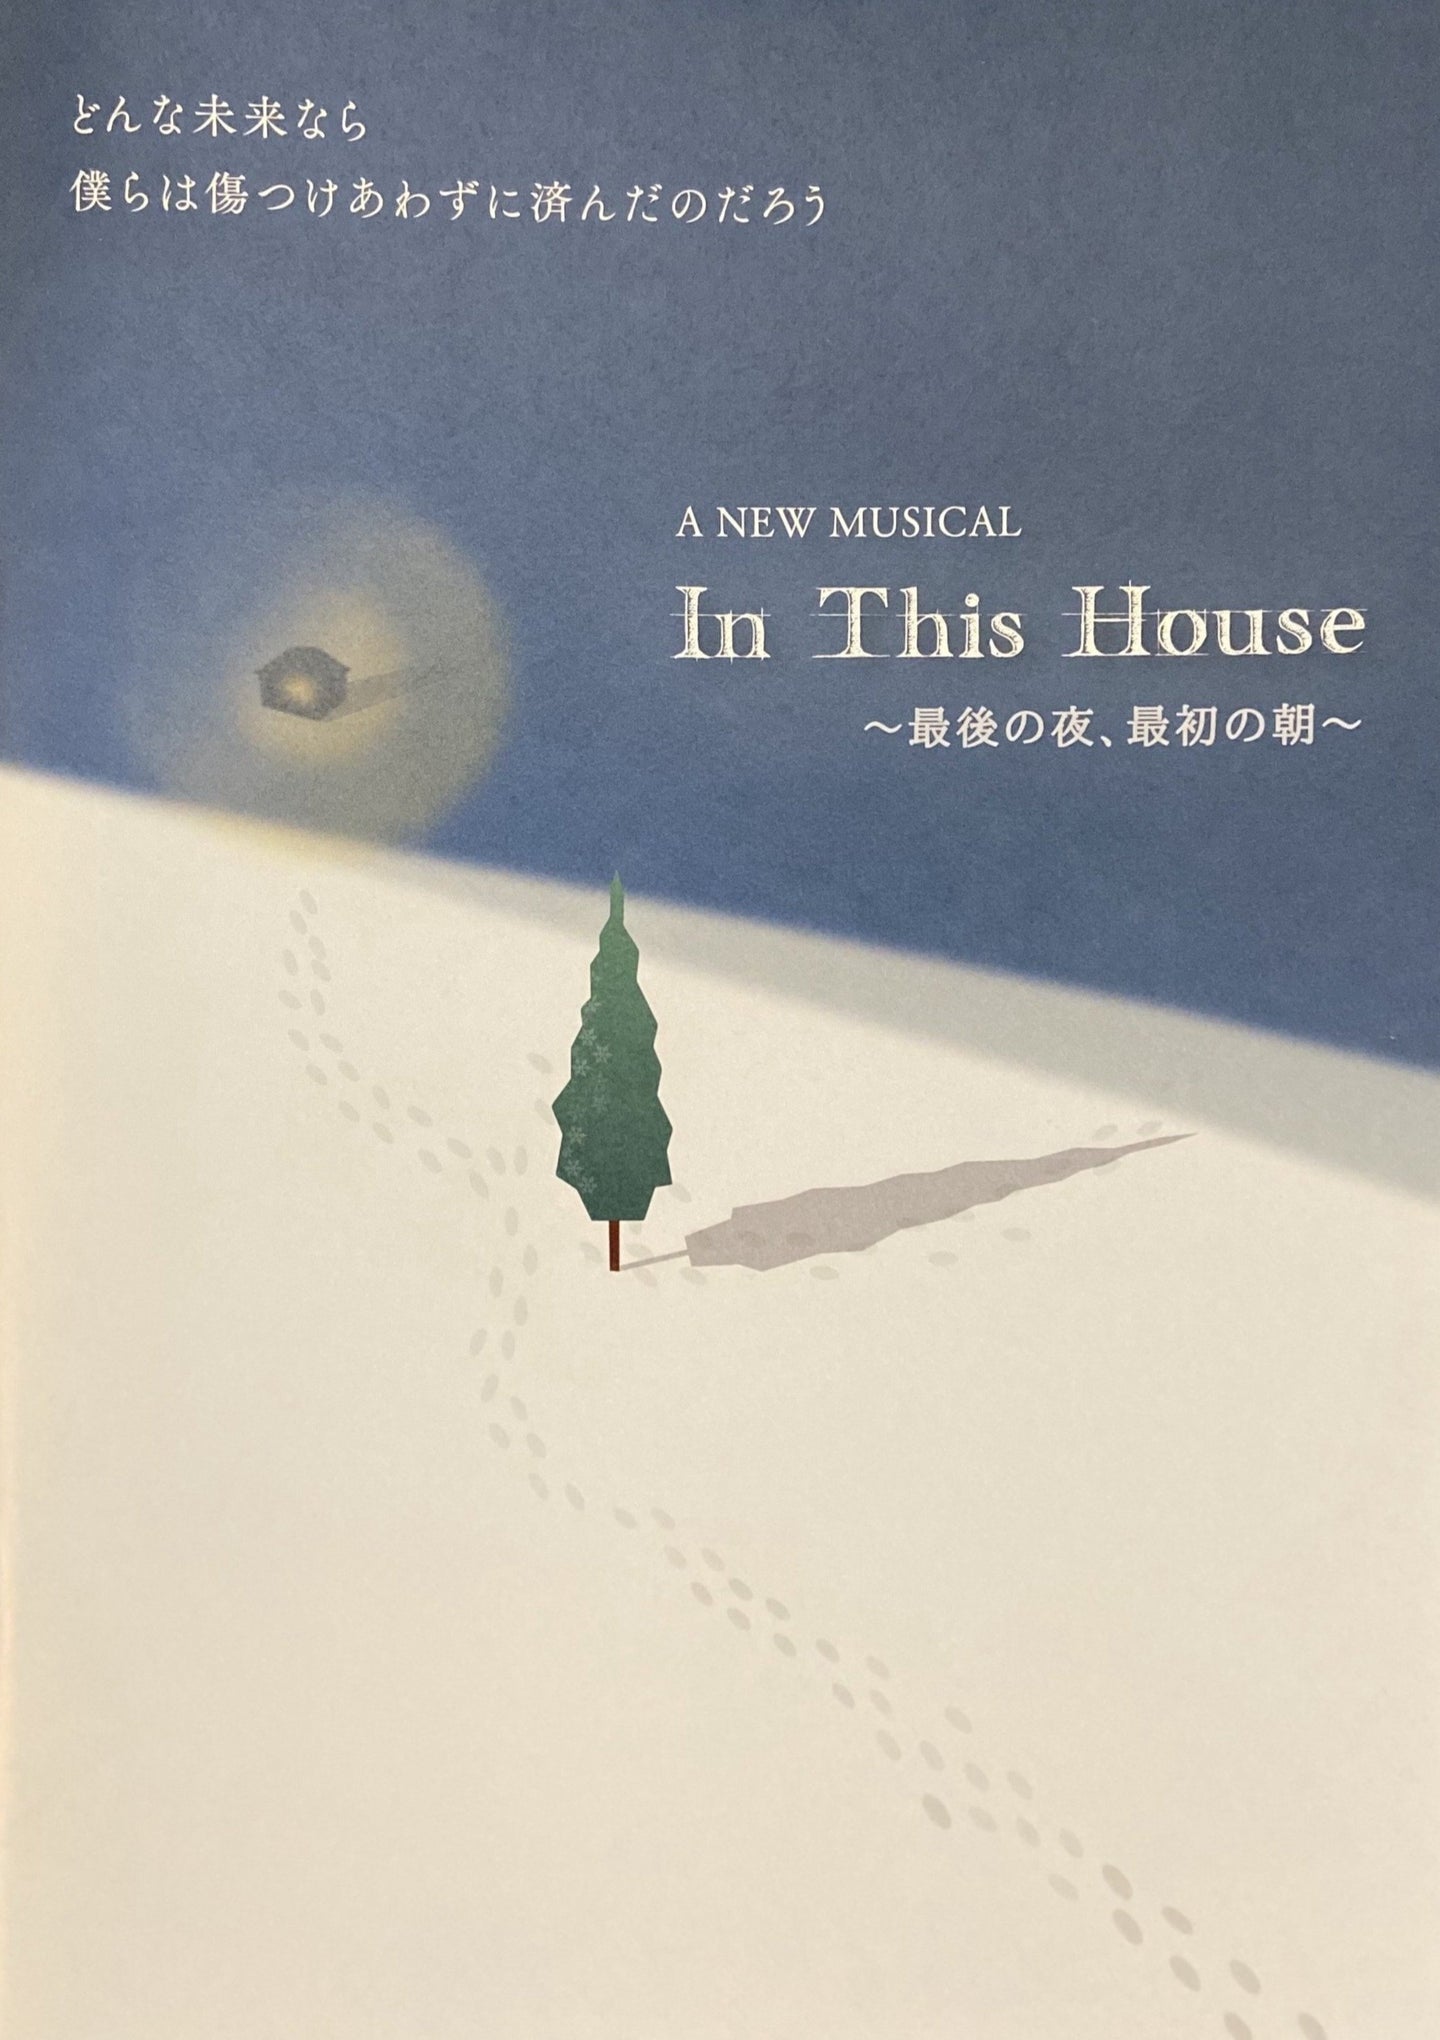 In This House〜最後の夜、最初の朝〜　公演パンフレット（2019年11月公演版）